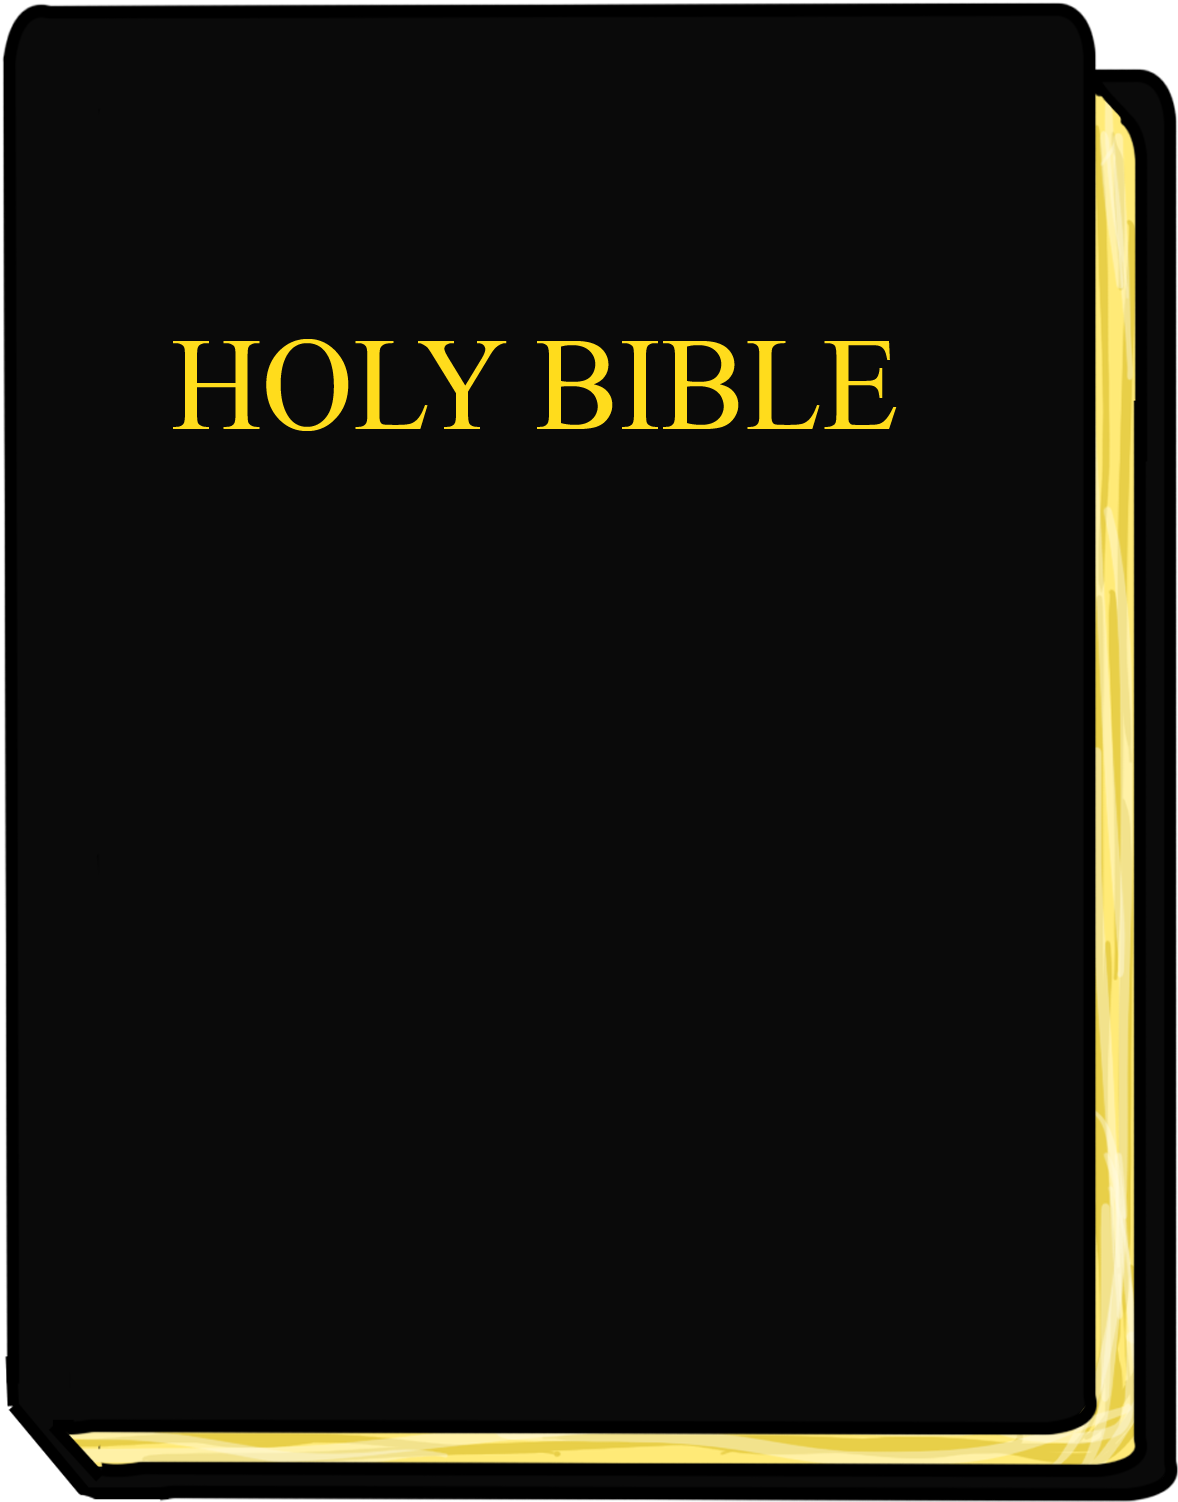 Bible Free To Use Clip Art - Free Clipart Of Bible (1350x1800)